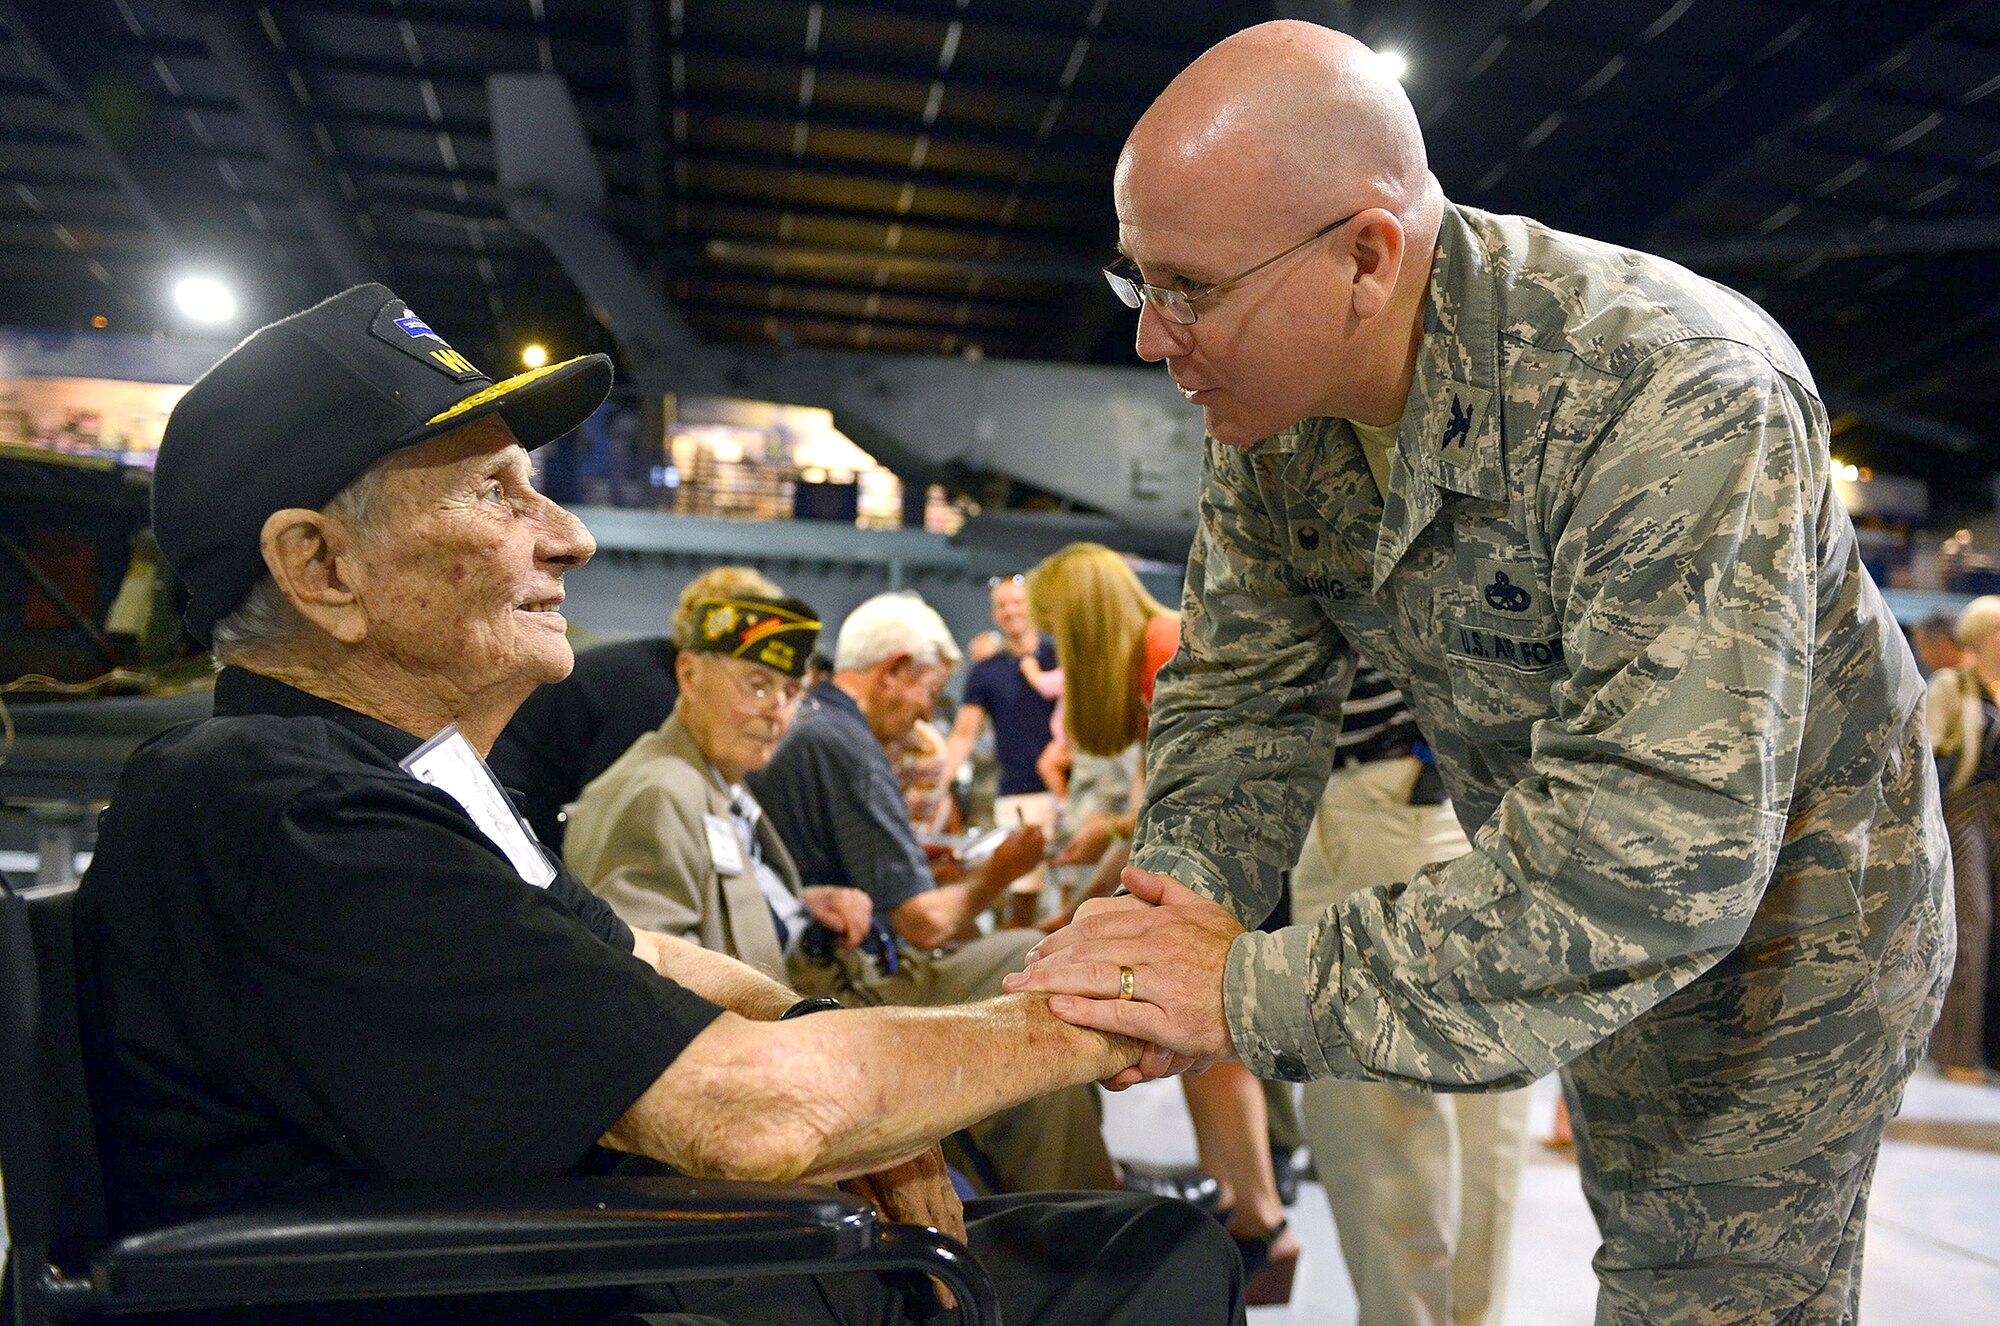 Col. Jeffrey King, Robins’ installation and 78th Air Base Wing commander, greets John Barrett, Army veteran, during a reception at the Museum of Aviation in Warner Robins, Ga., Aug. 21. Barrett – a private first class during the war -- received a Purple Heart and Silver Star after being wounded in action and taken as a prisoner of war during World War II. The reception honored veterans who served aboard B-17s and celebrated the arrival of a B-17 Flying Fortress which will be displayed at the museum. The engines, wings and tail section of the aircraft -- which arrived a day earlier -- were on display during the reception. At the event, several B-17 crew members shared their memories of the aircraft with nearly 200 attendees. (U.S. Air Force photo by Tommie Horton)